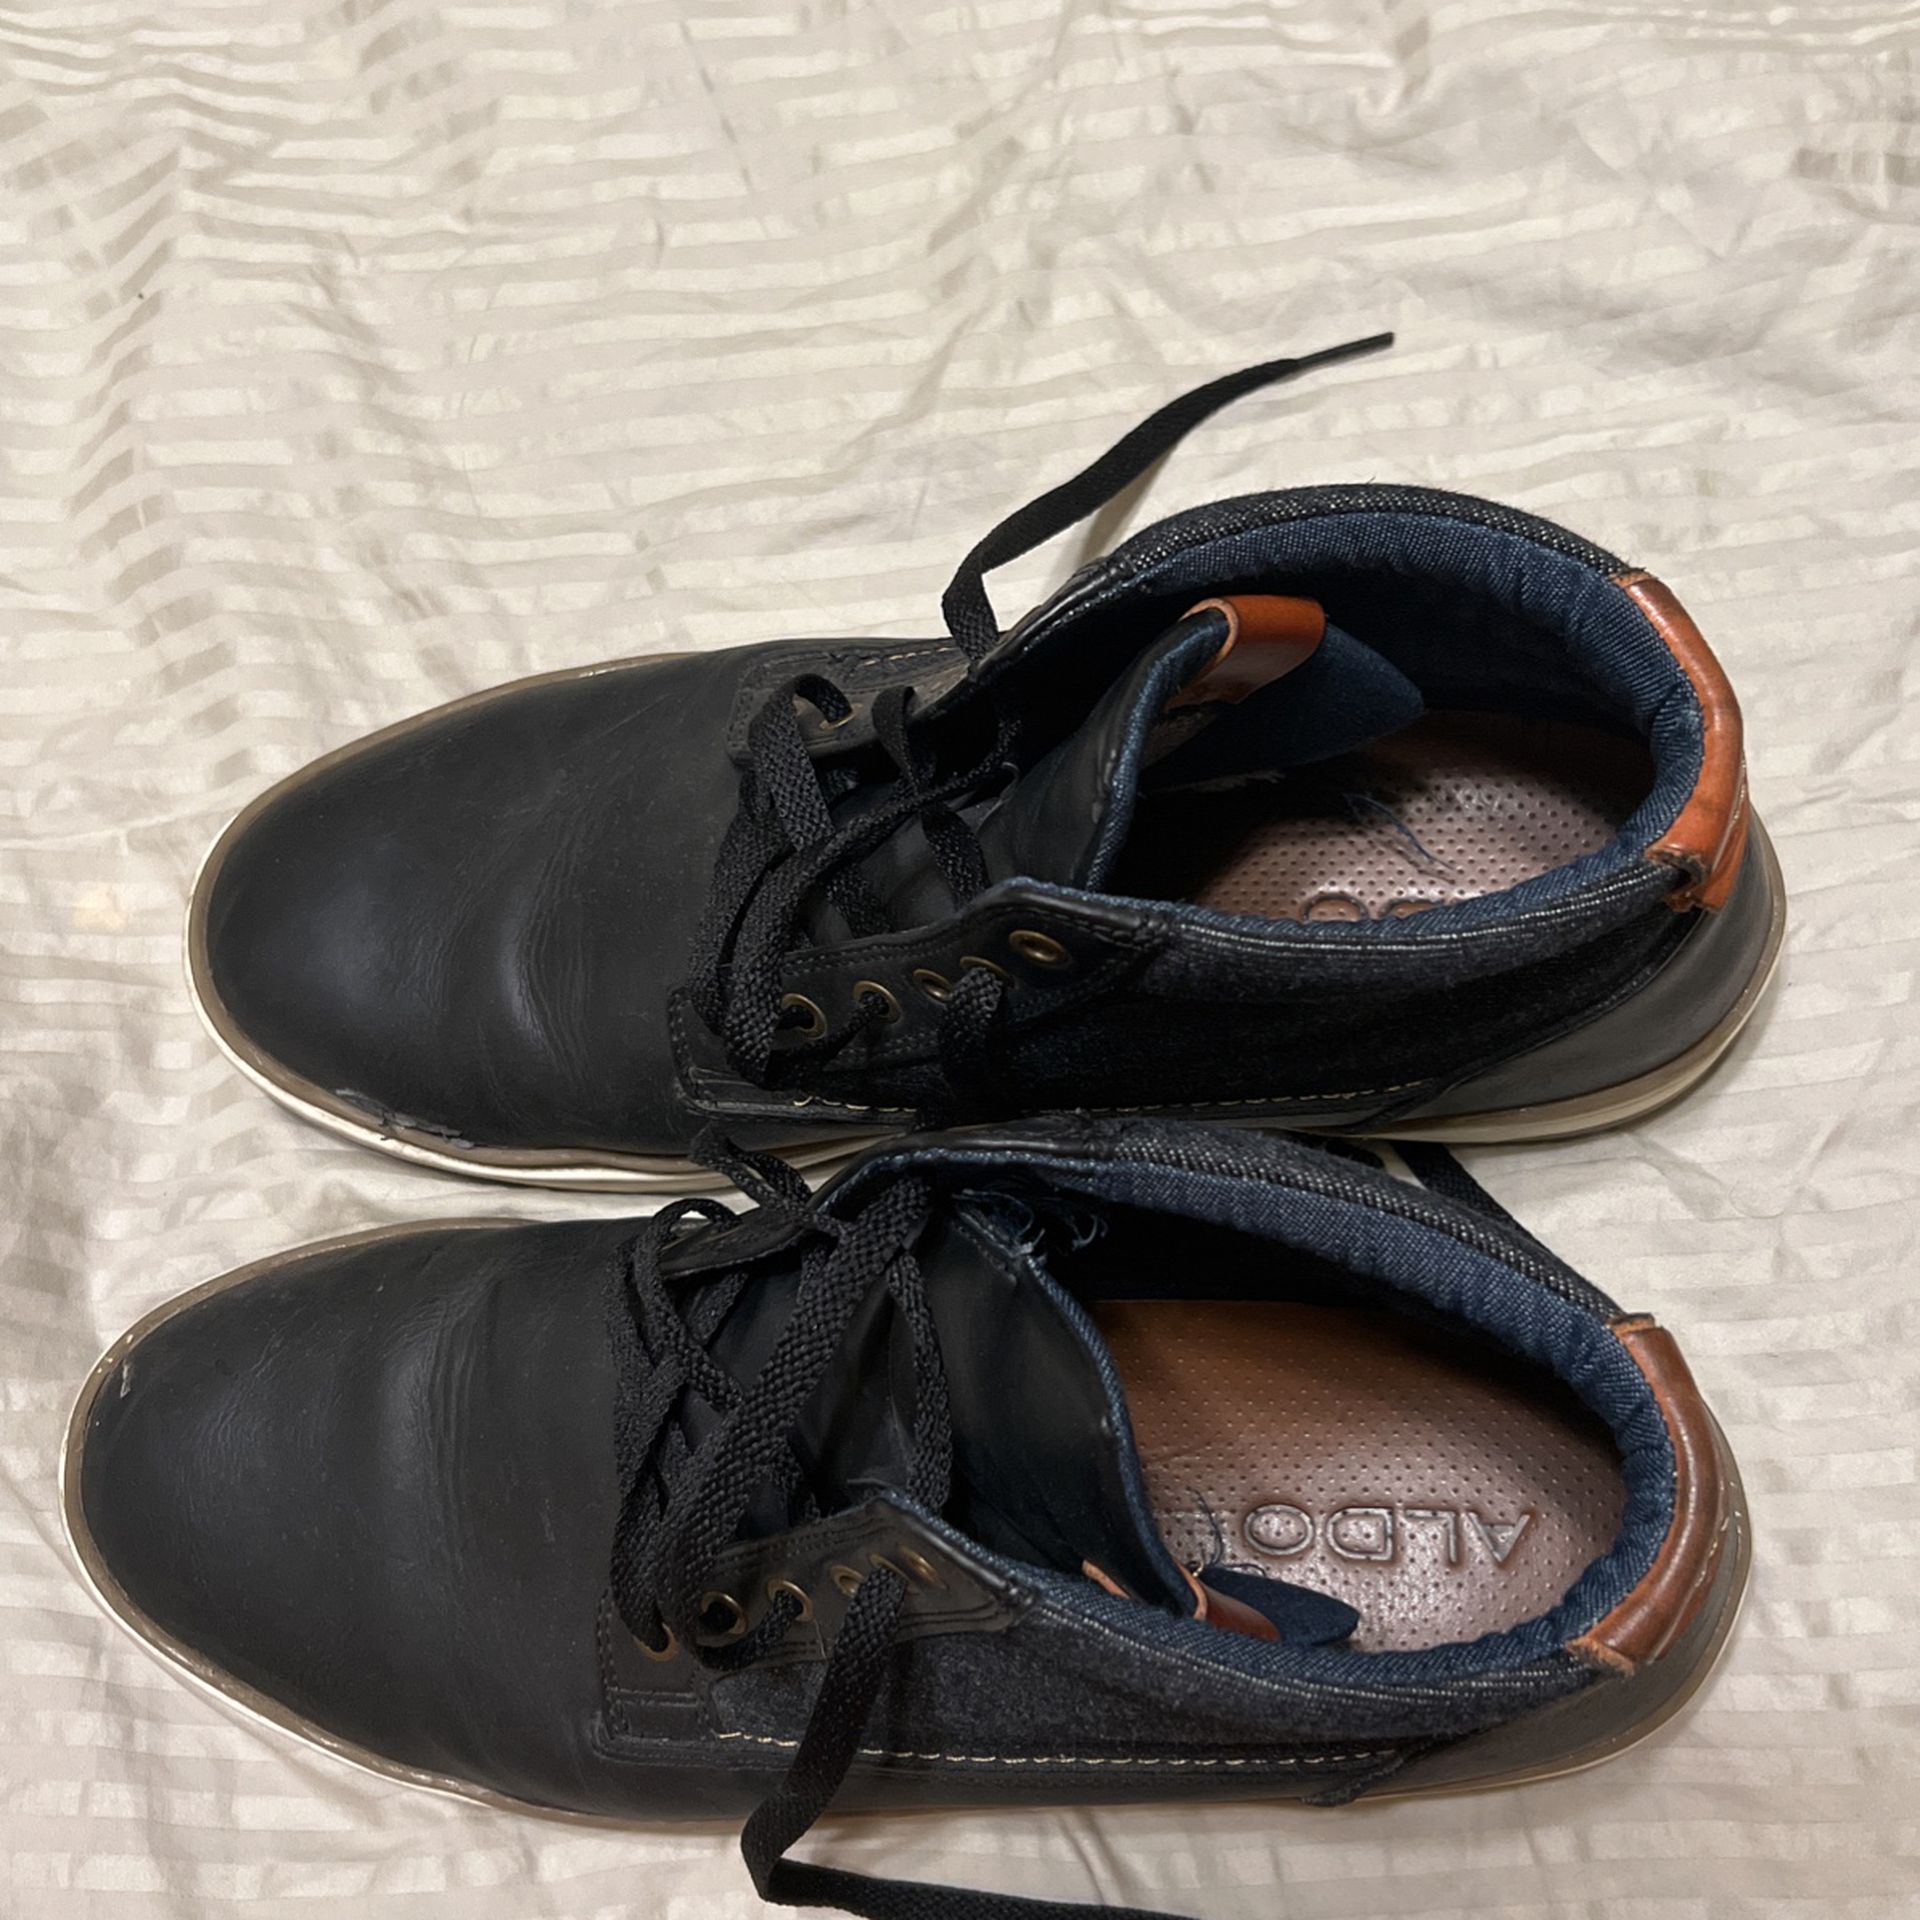 Aldo Dress Shoes for Sale in Helotes, TX - OfferUp